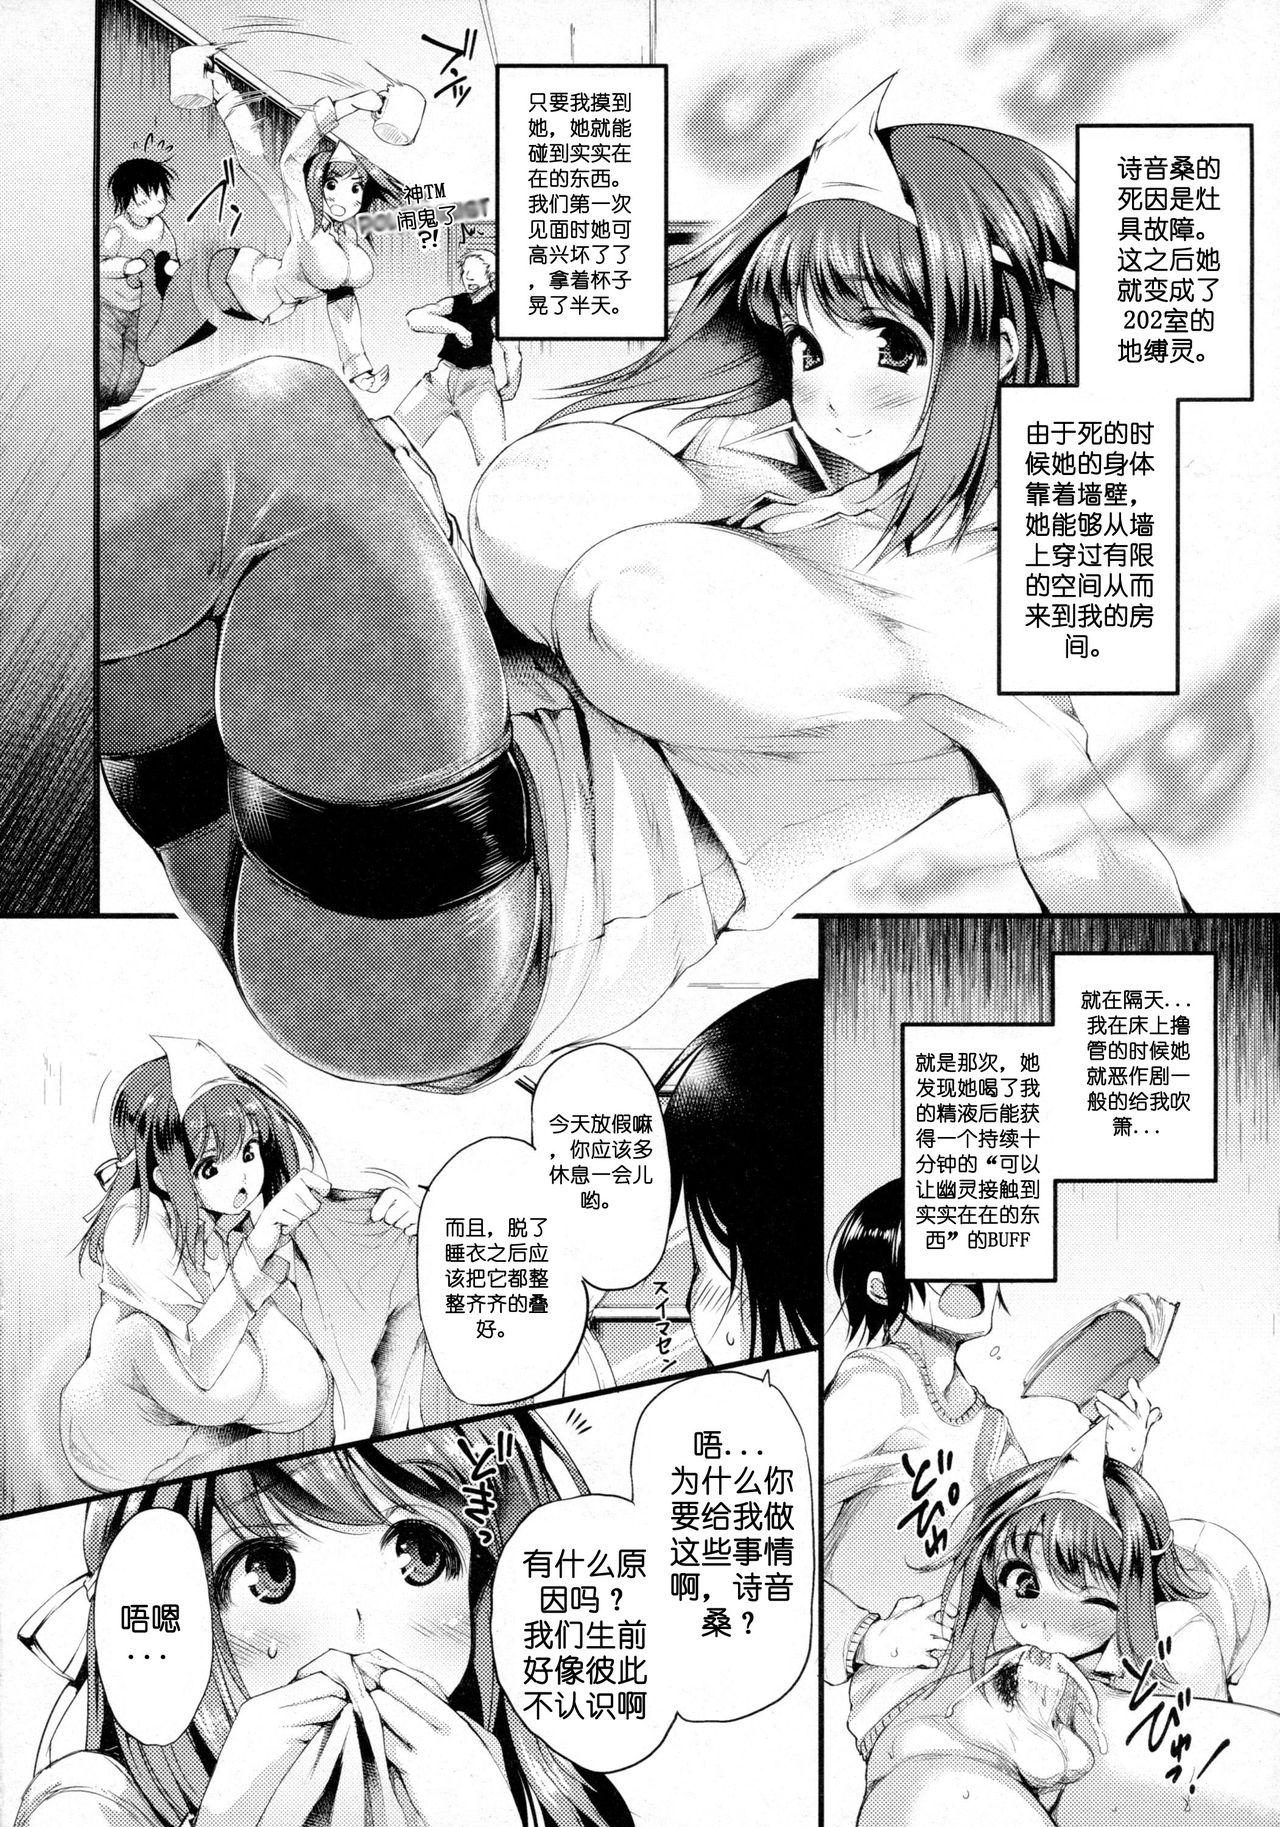 Small Tits Porn [Oohira Sunset] 202-Goushitsu no Yuurei-san | The Ghost in Room 202 (COMIC Unreal 2016-02 Vol. 59) [Chinese] [简称天子个人汉化] (Ongoing) Spreading - Page 2